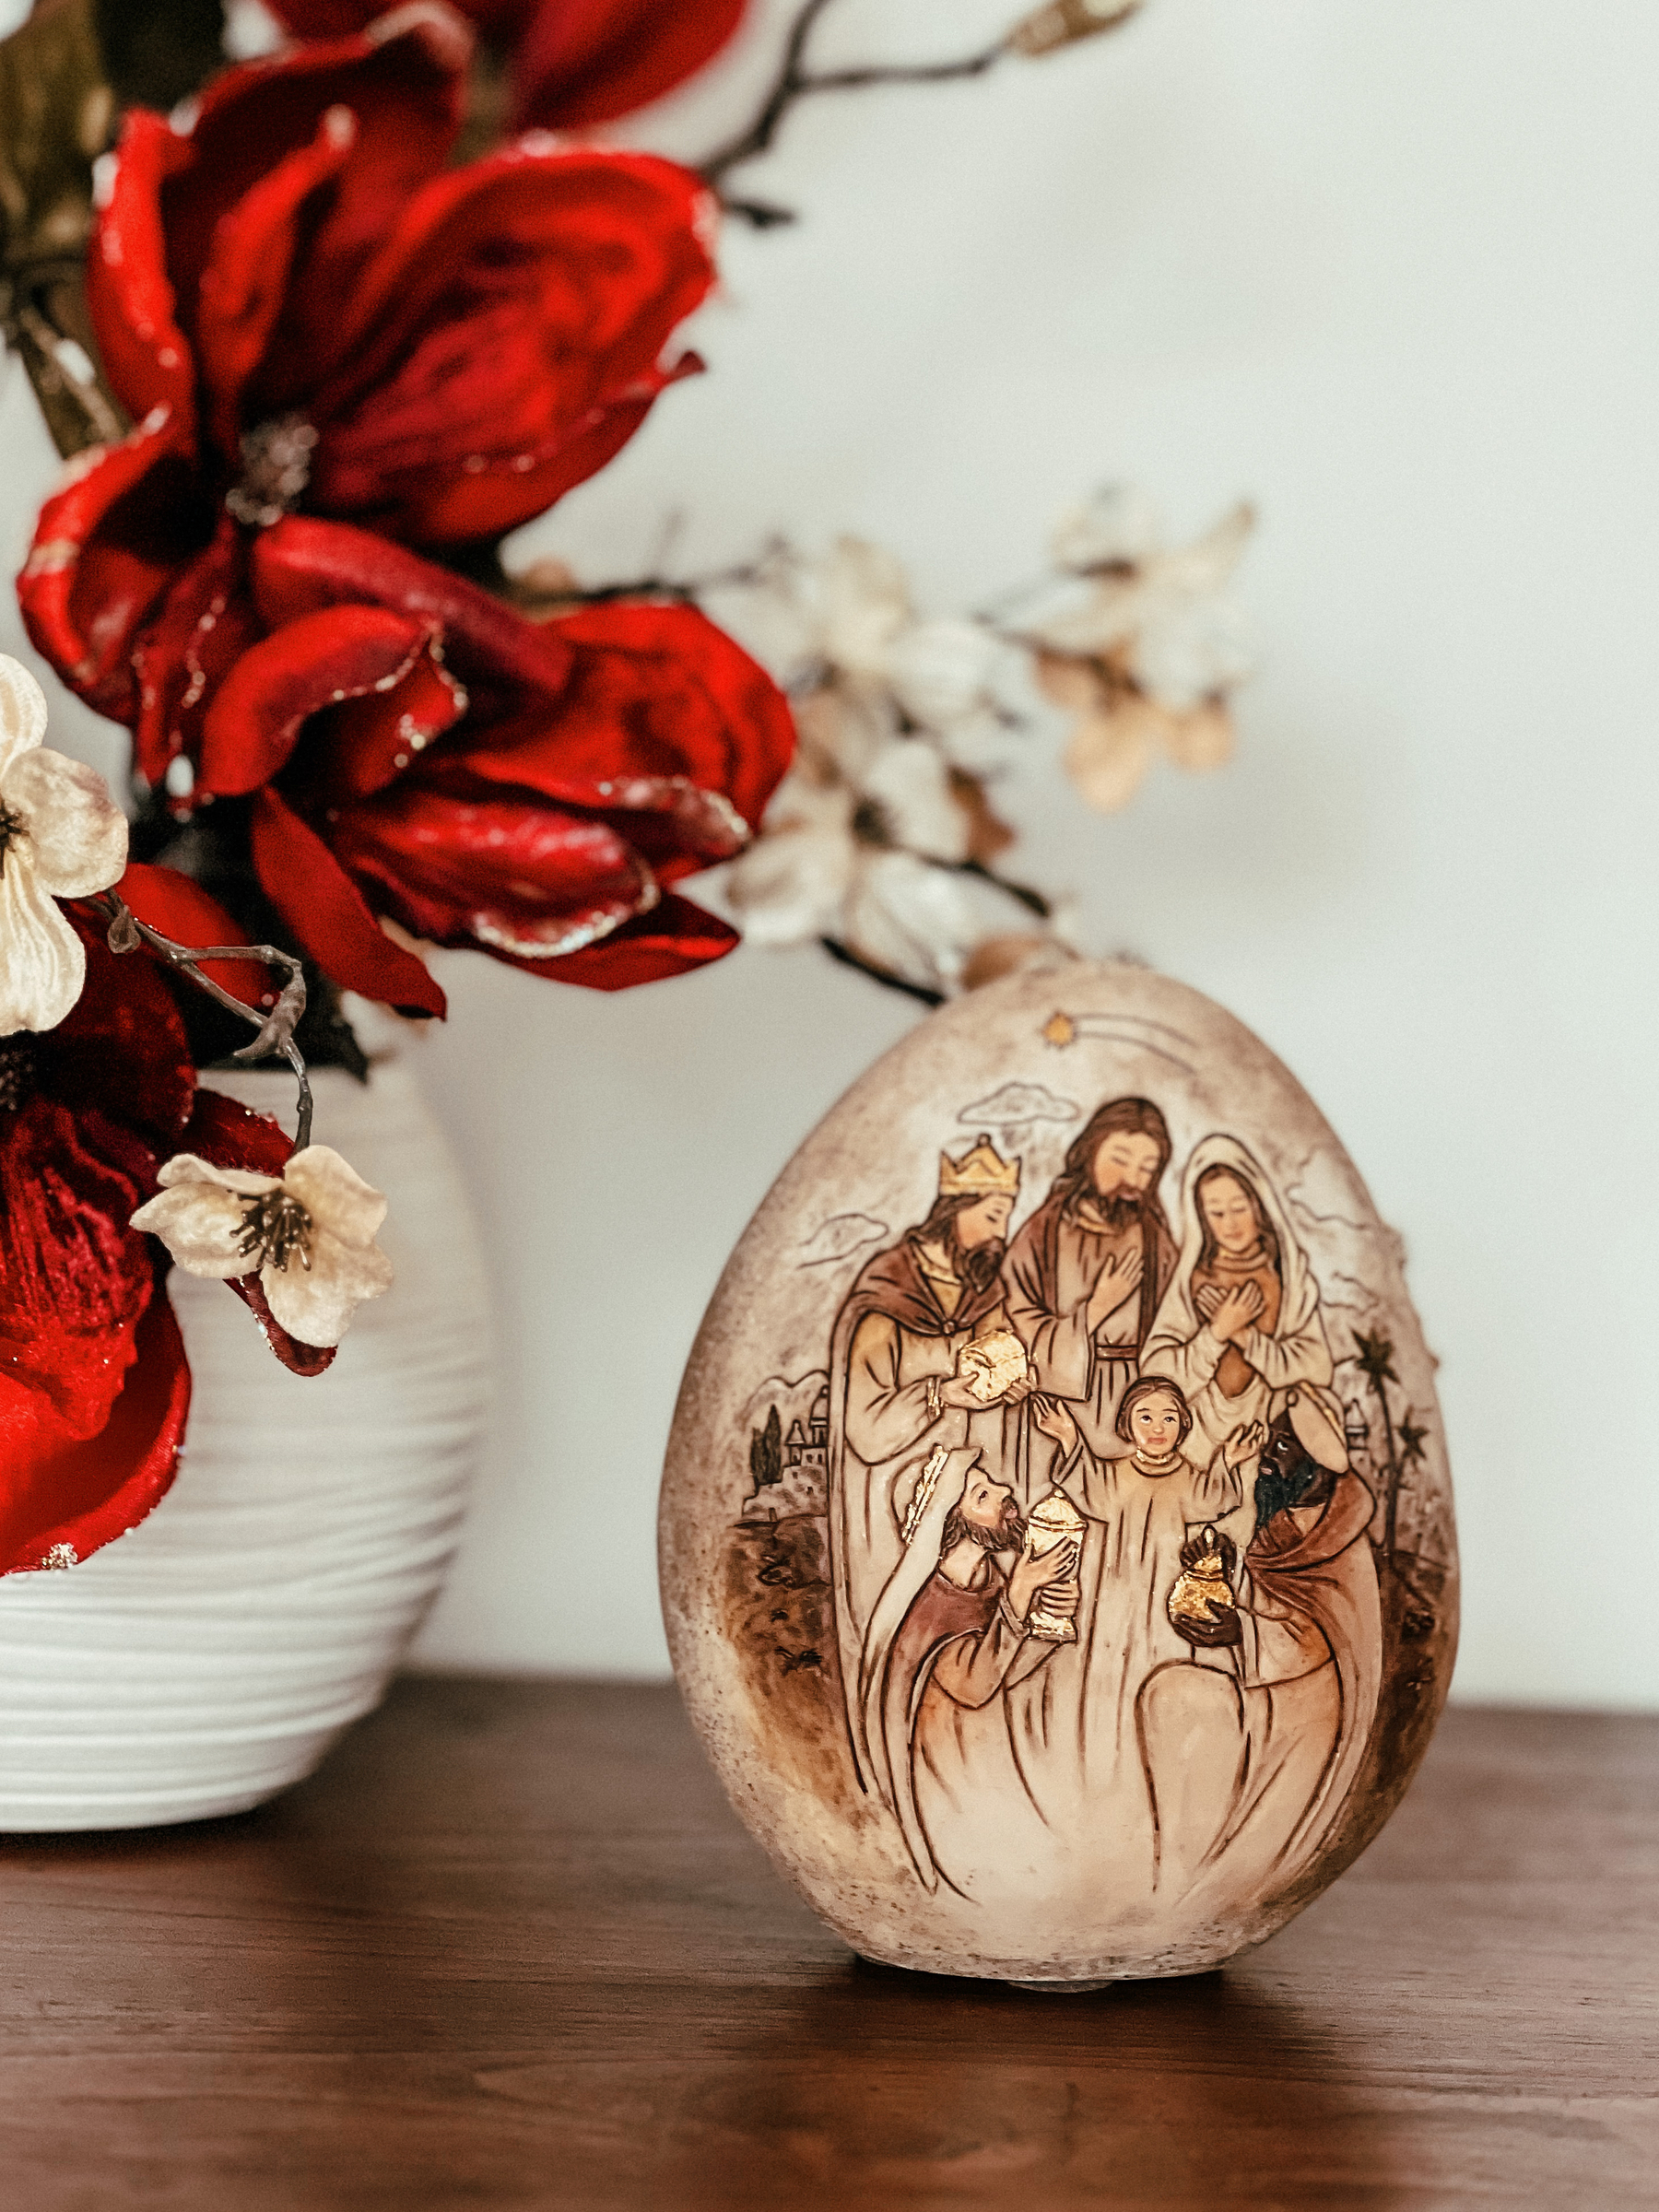 A stone “egg” with a nativity scene painted on it. On the left side a vase with red flowers. 